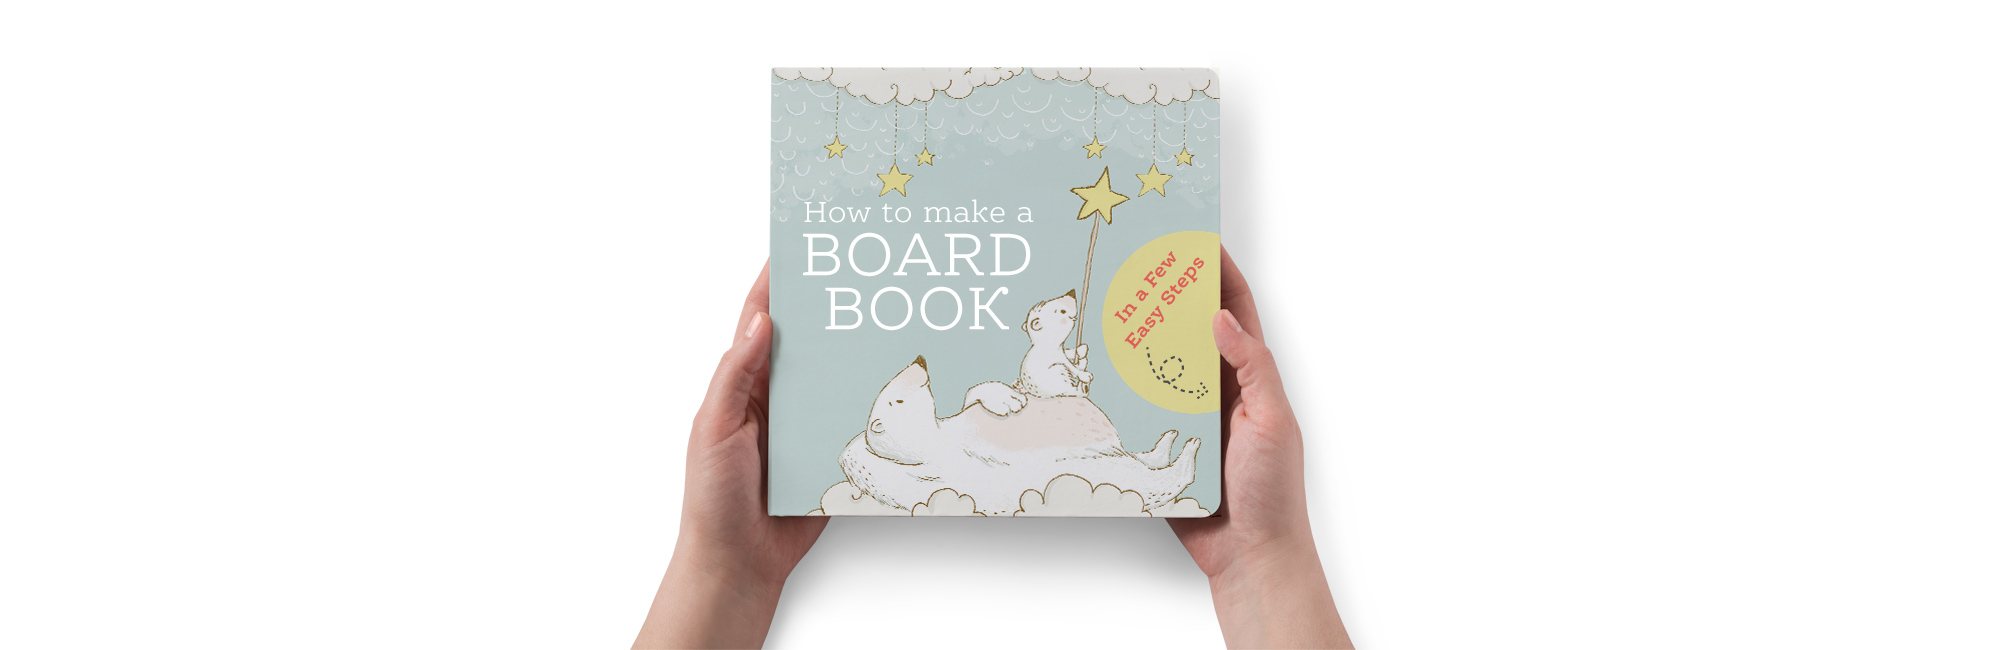 How to Make a Board Book